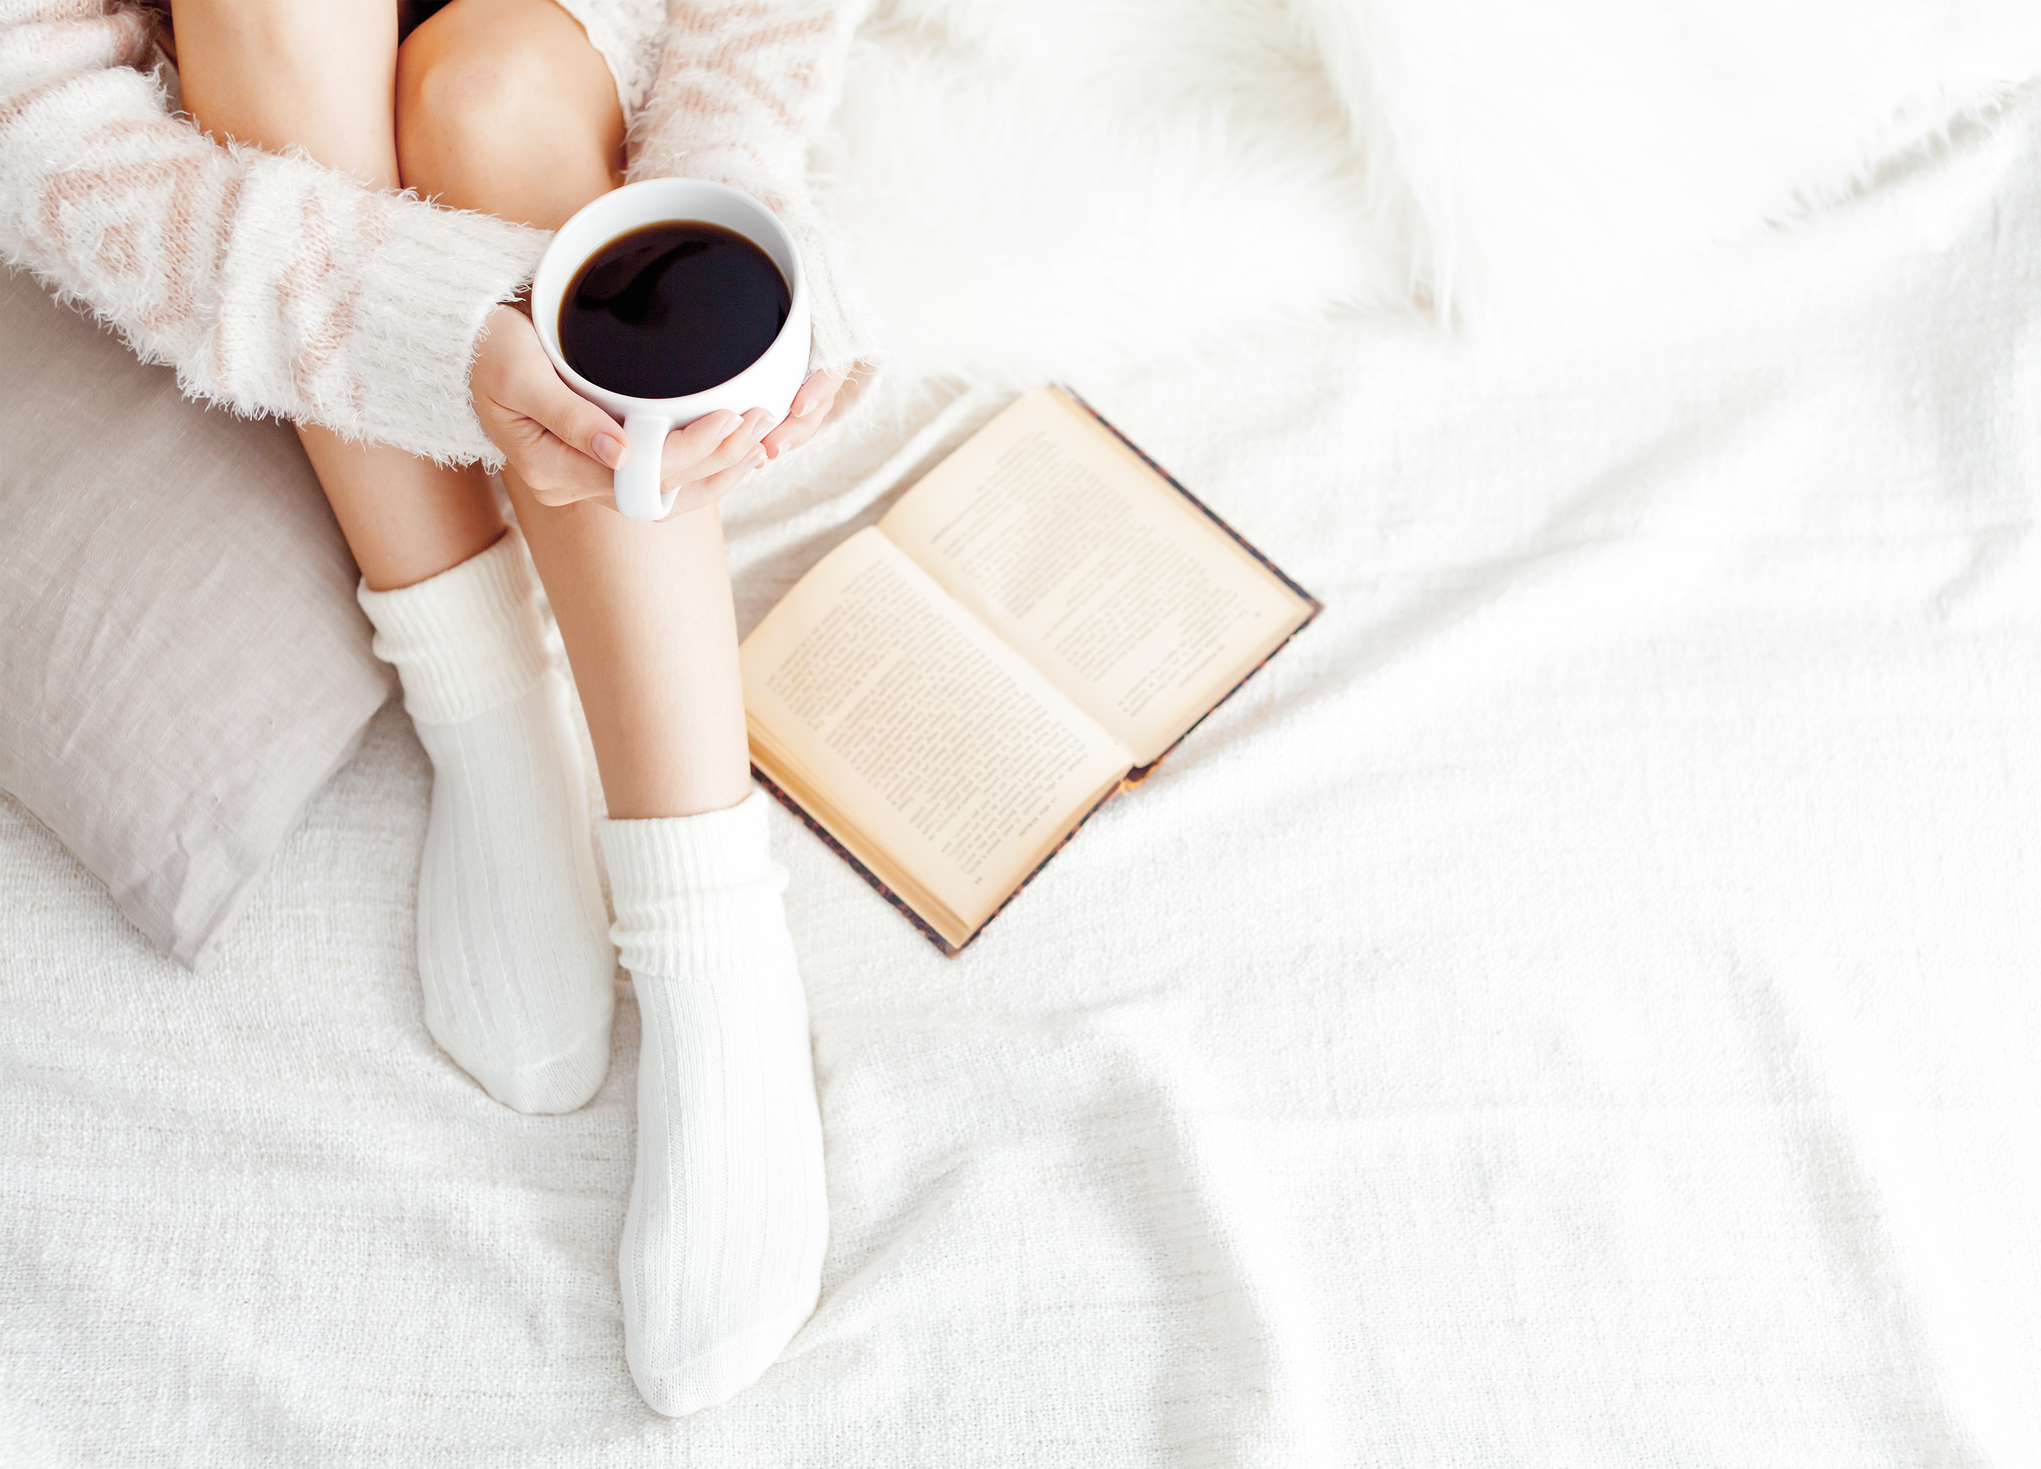 Soft photo of woman on the bed with old book and cup of coffee, top view point